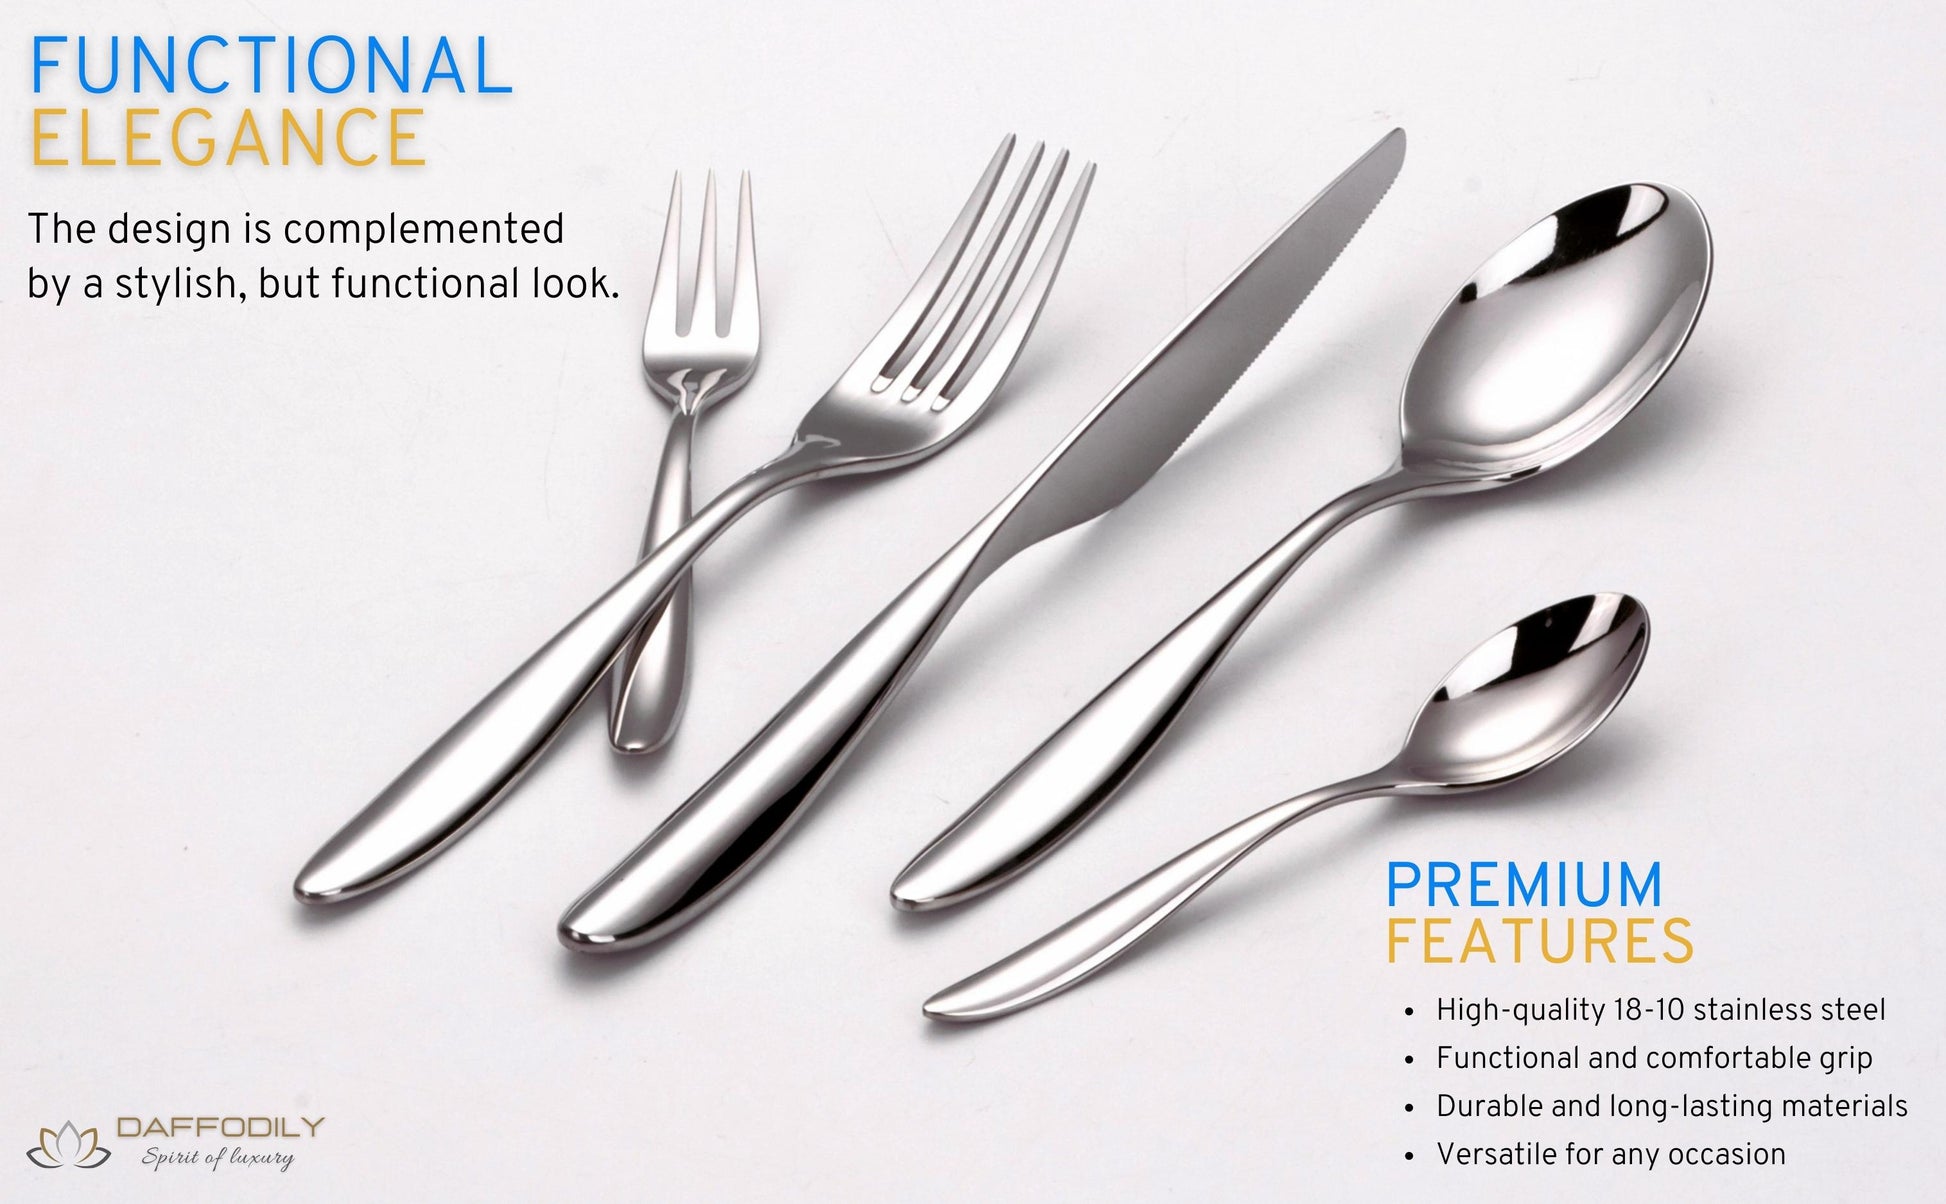 Dishwasher-safe cutlery set for easy cleaning and maintenance